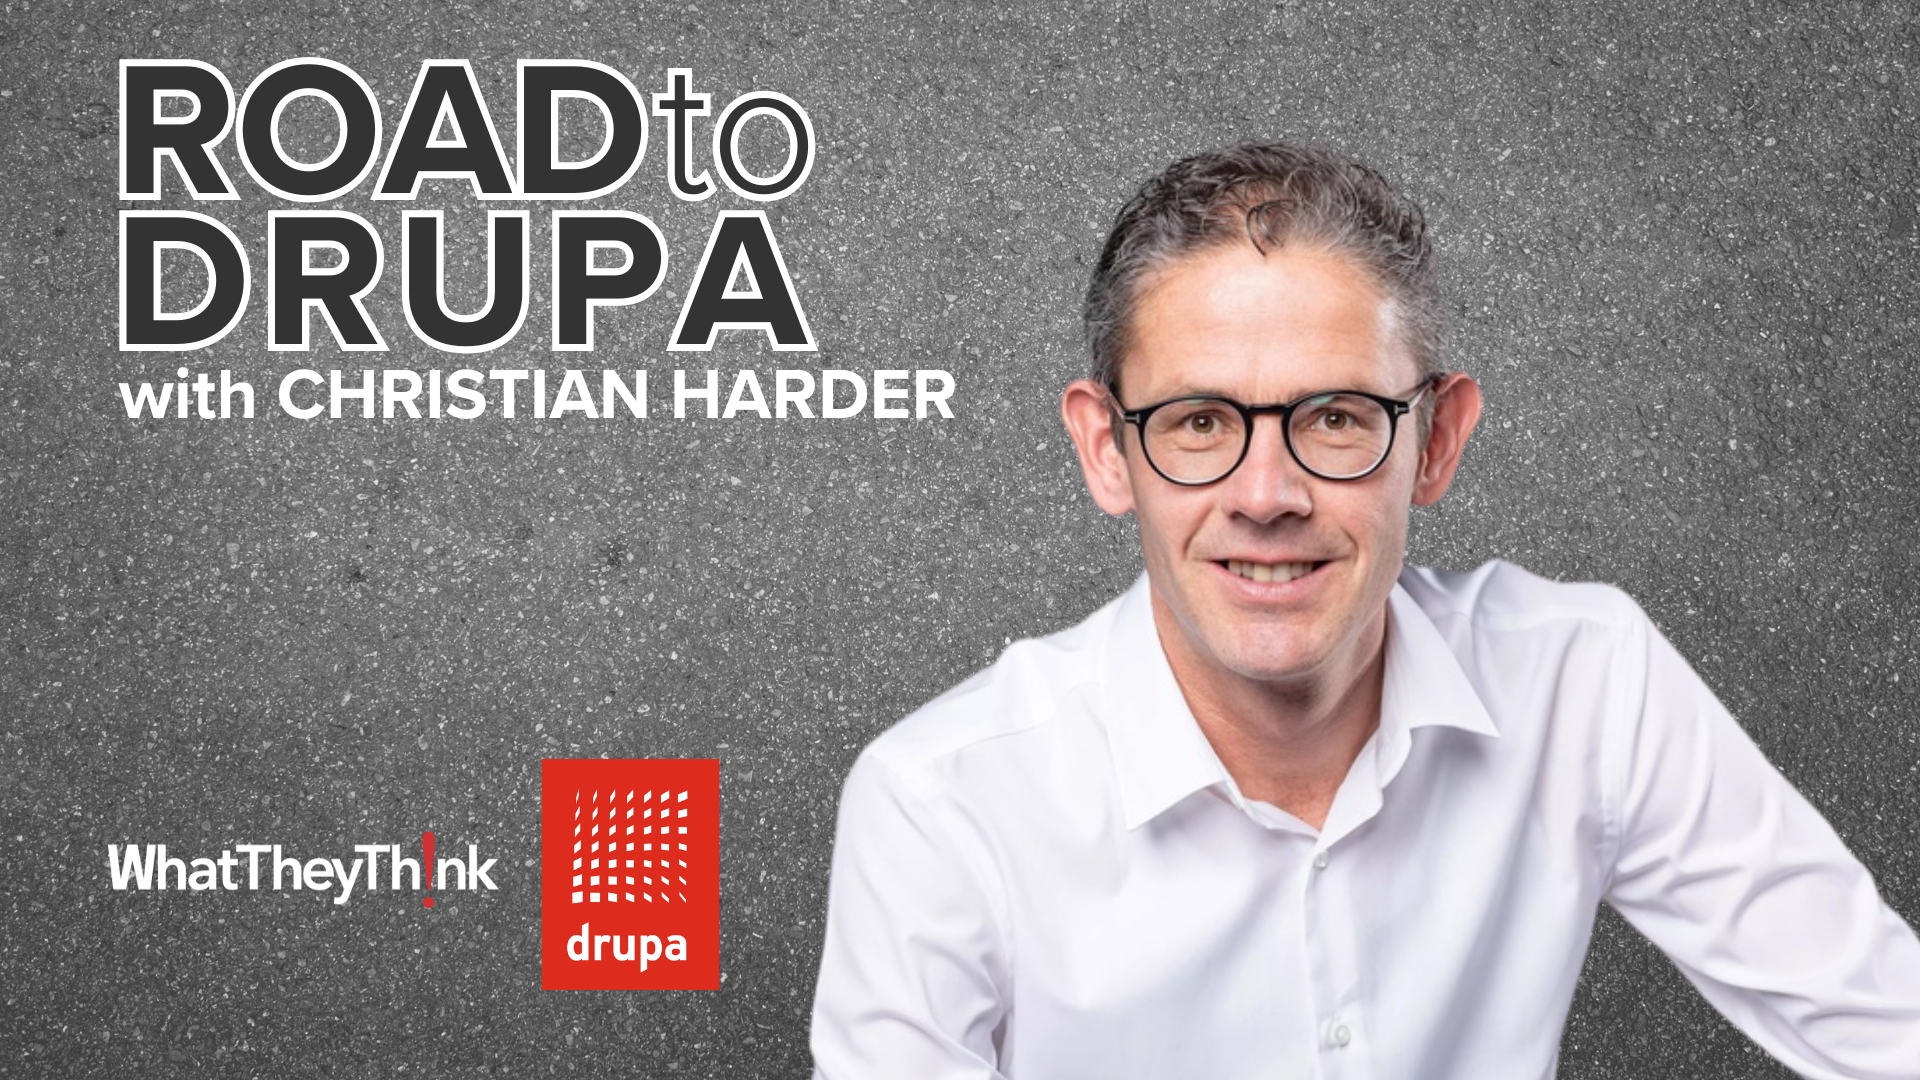 Road to drupa: Durst Group's Christian Harder